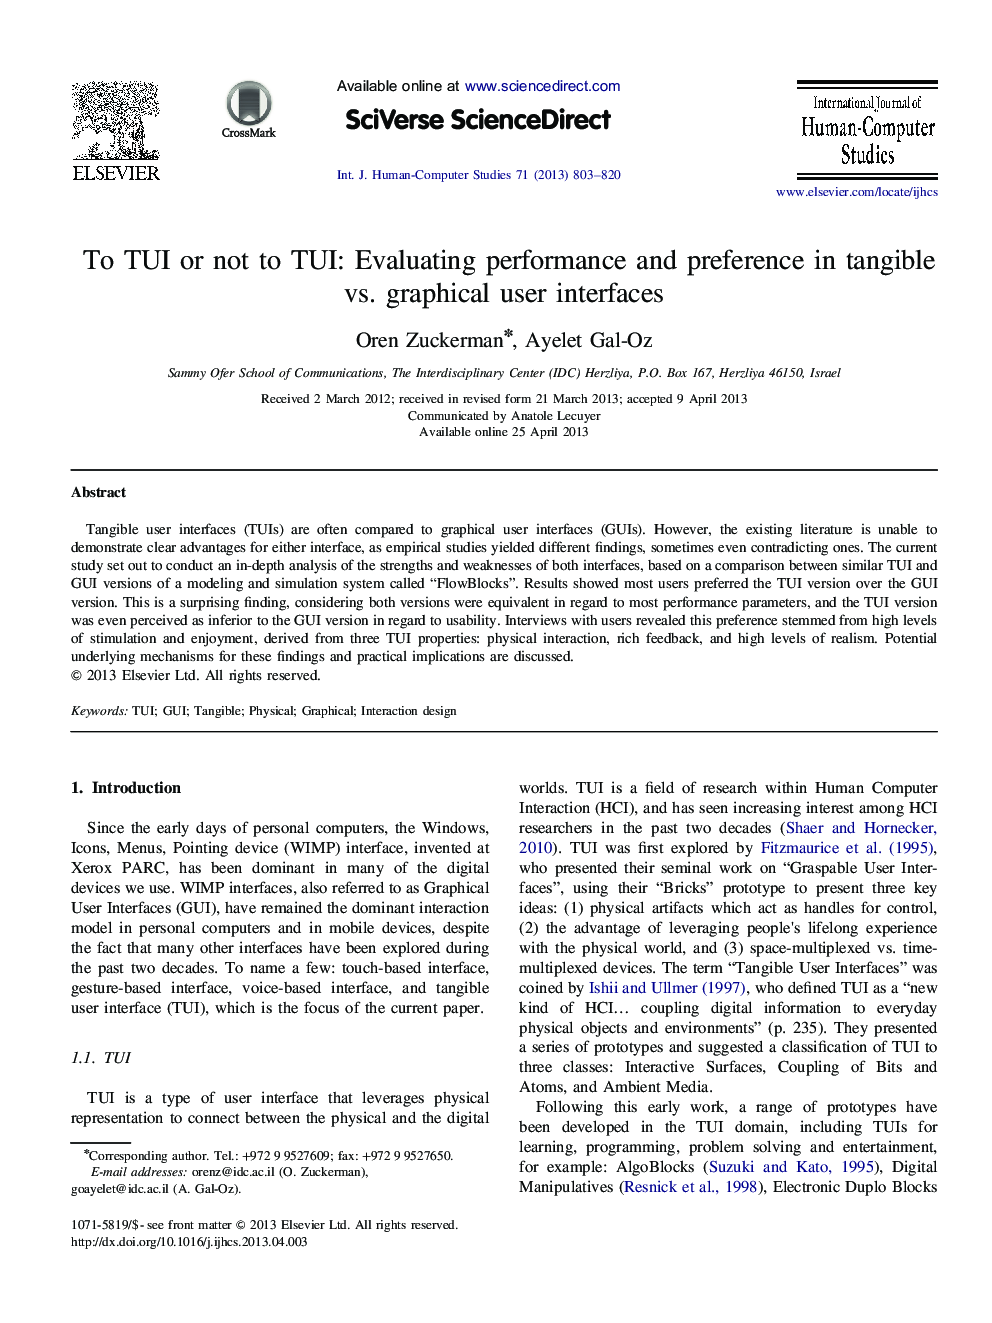 To TUI or not to TUI: Evaluating performance and preference in tangible vs. graphical user interfaces